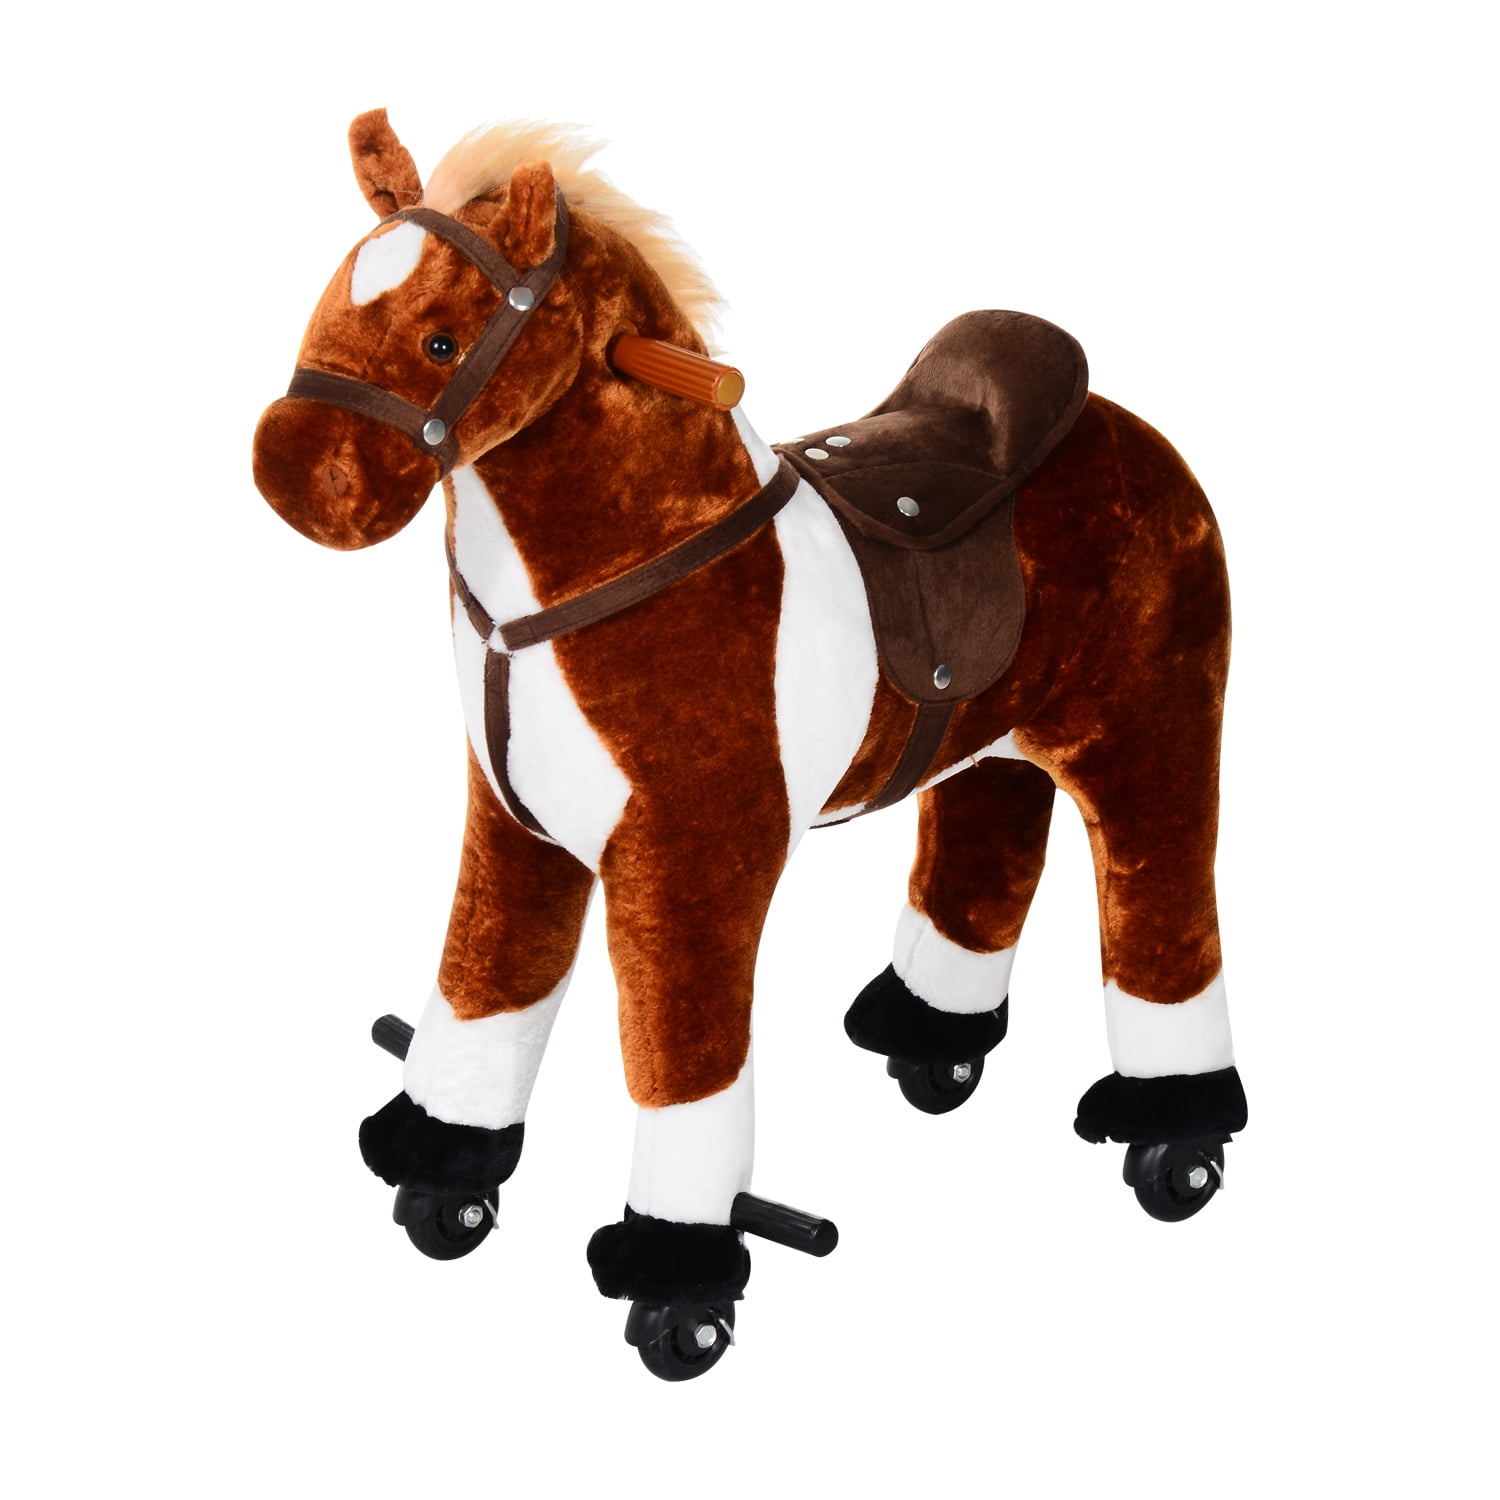 Kids Ride-On Rolling Horse Interactive Battery Operated Toy Plush Brown 